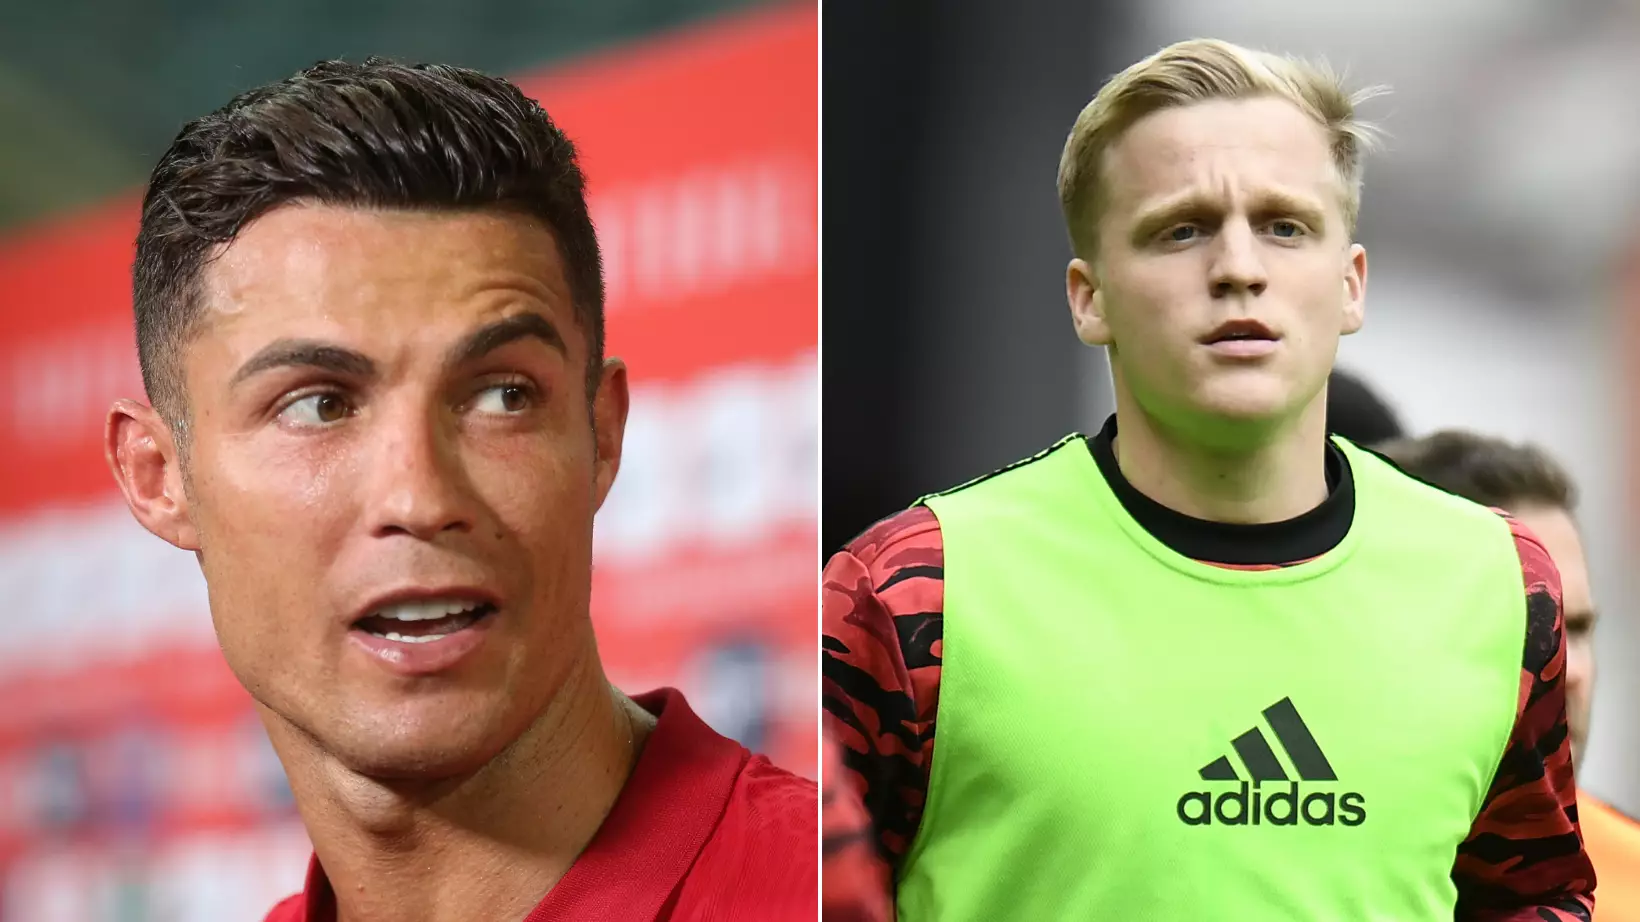 Cristiano Ronaldo's Return To Man United Is 'Bad News' For Donny van de Beek, Says Player's Agent